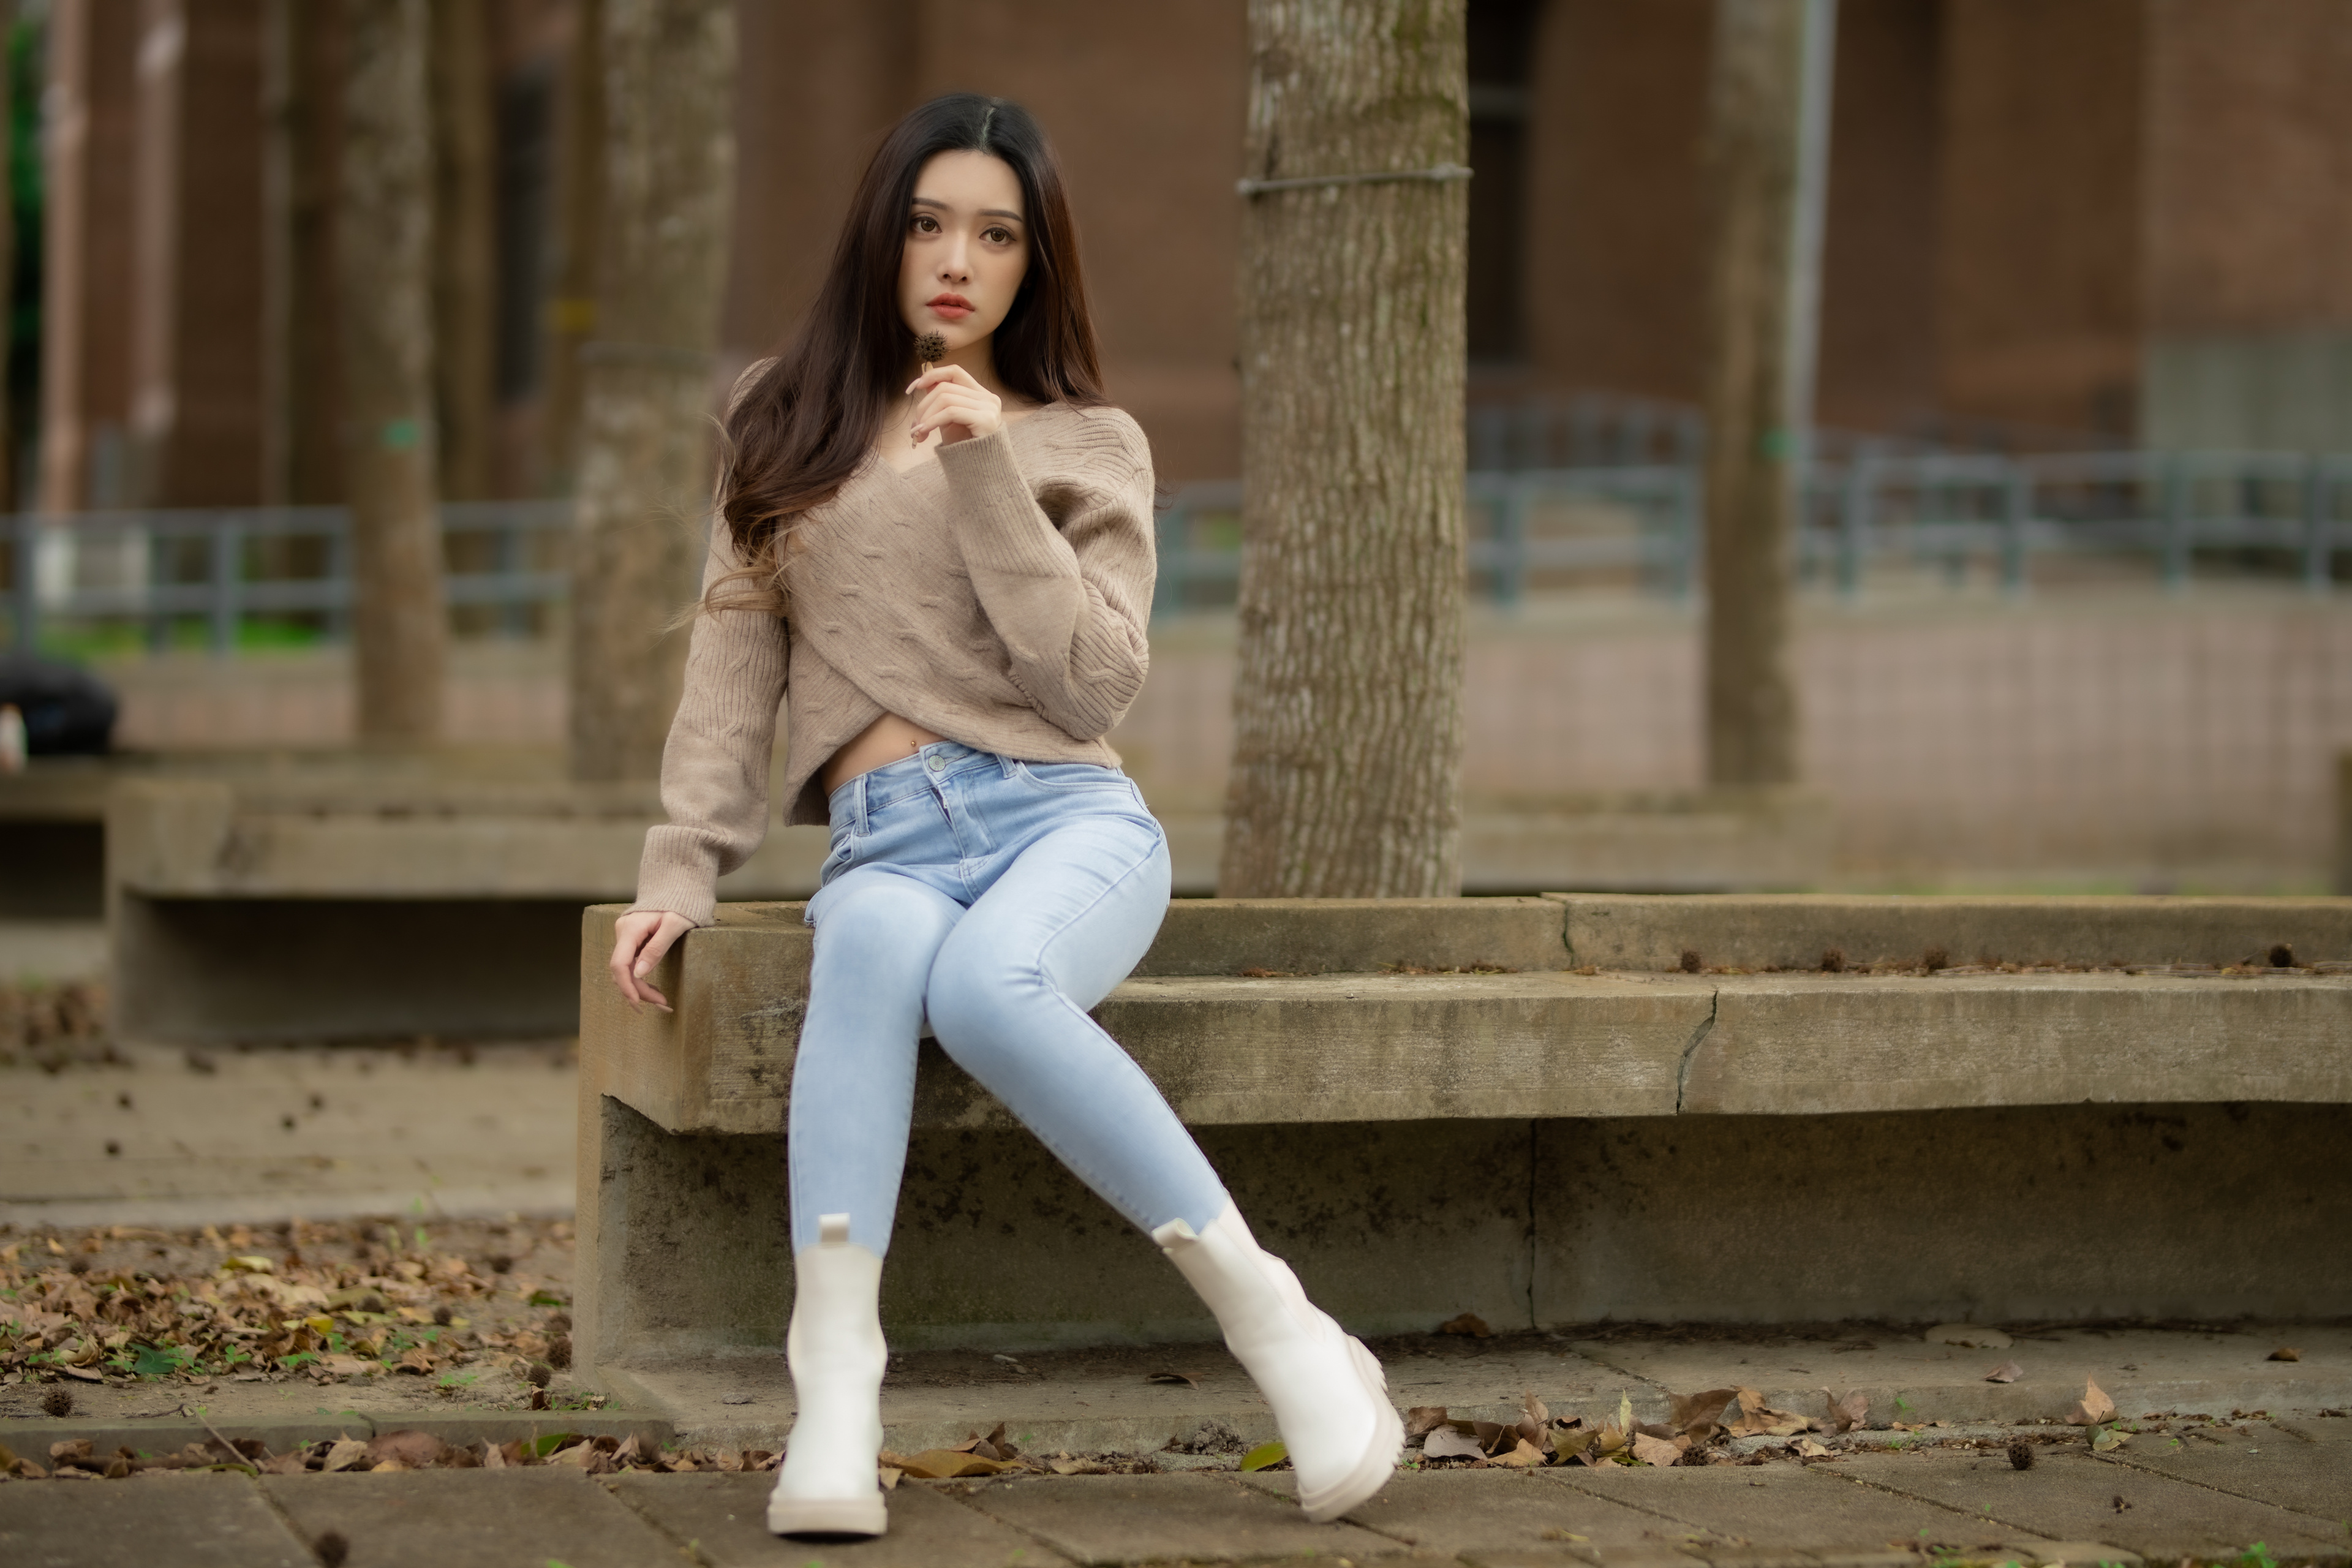 Asian Model Women Long Hair Dark Hair Sitting Bench Depth Of Field Ankle Boots Jeans Pullover Trees 3840x2560